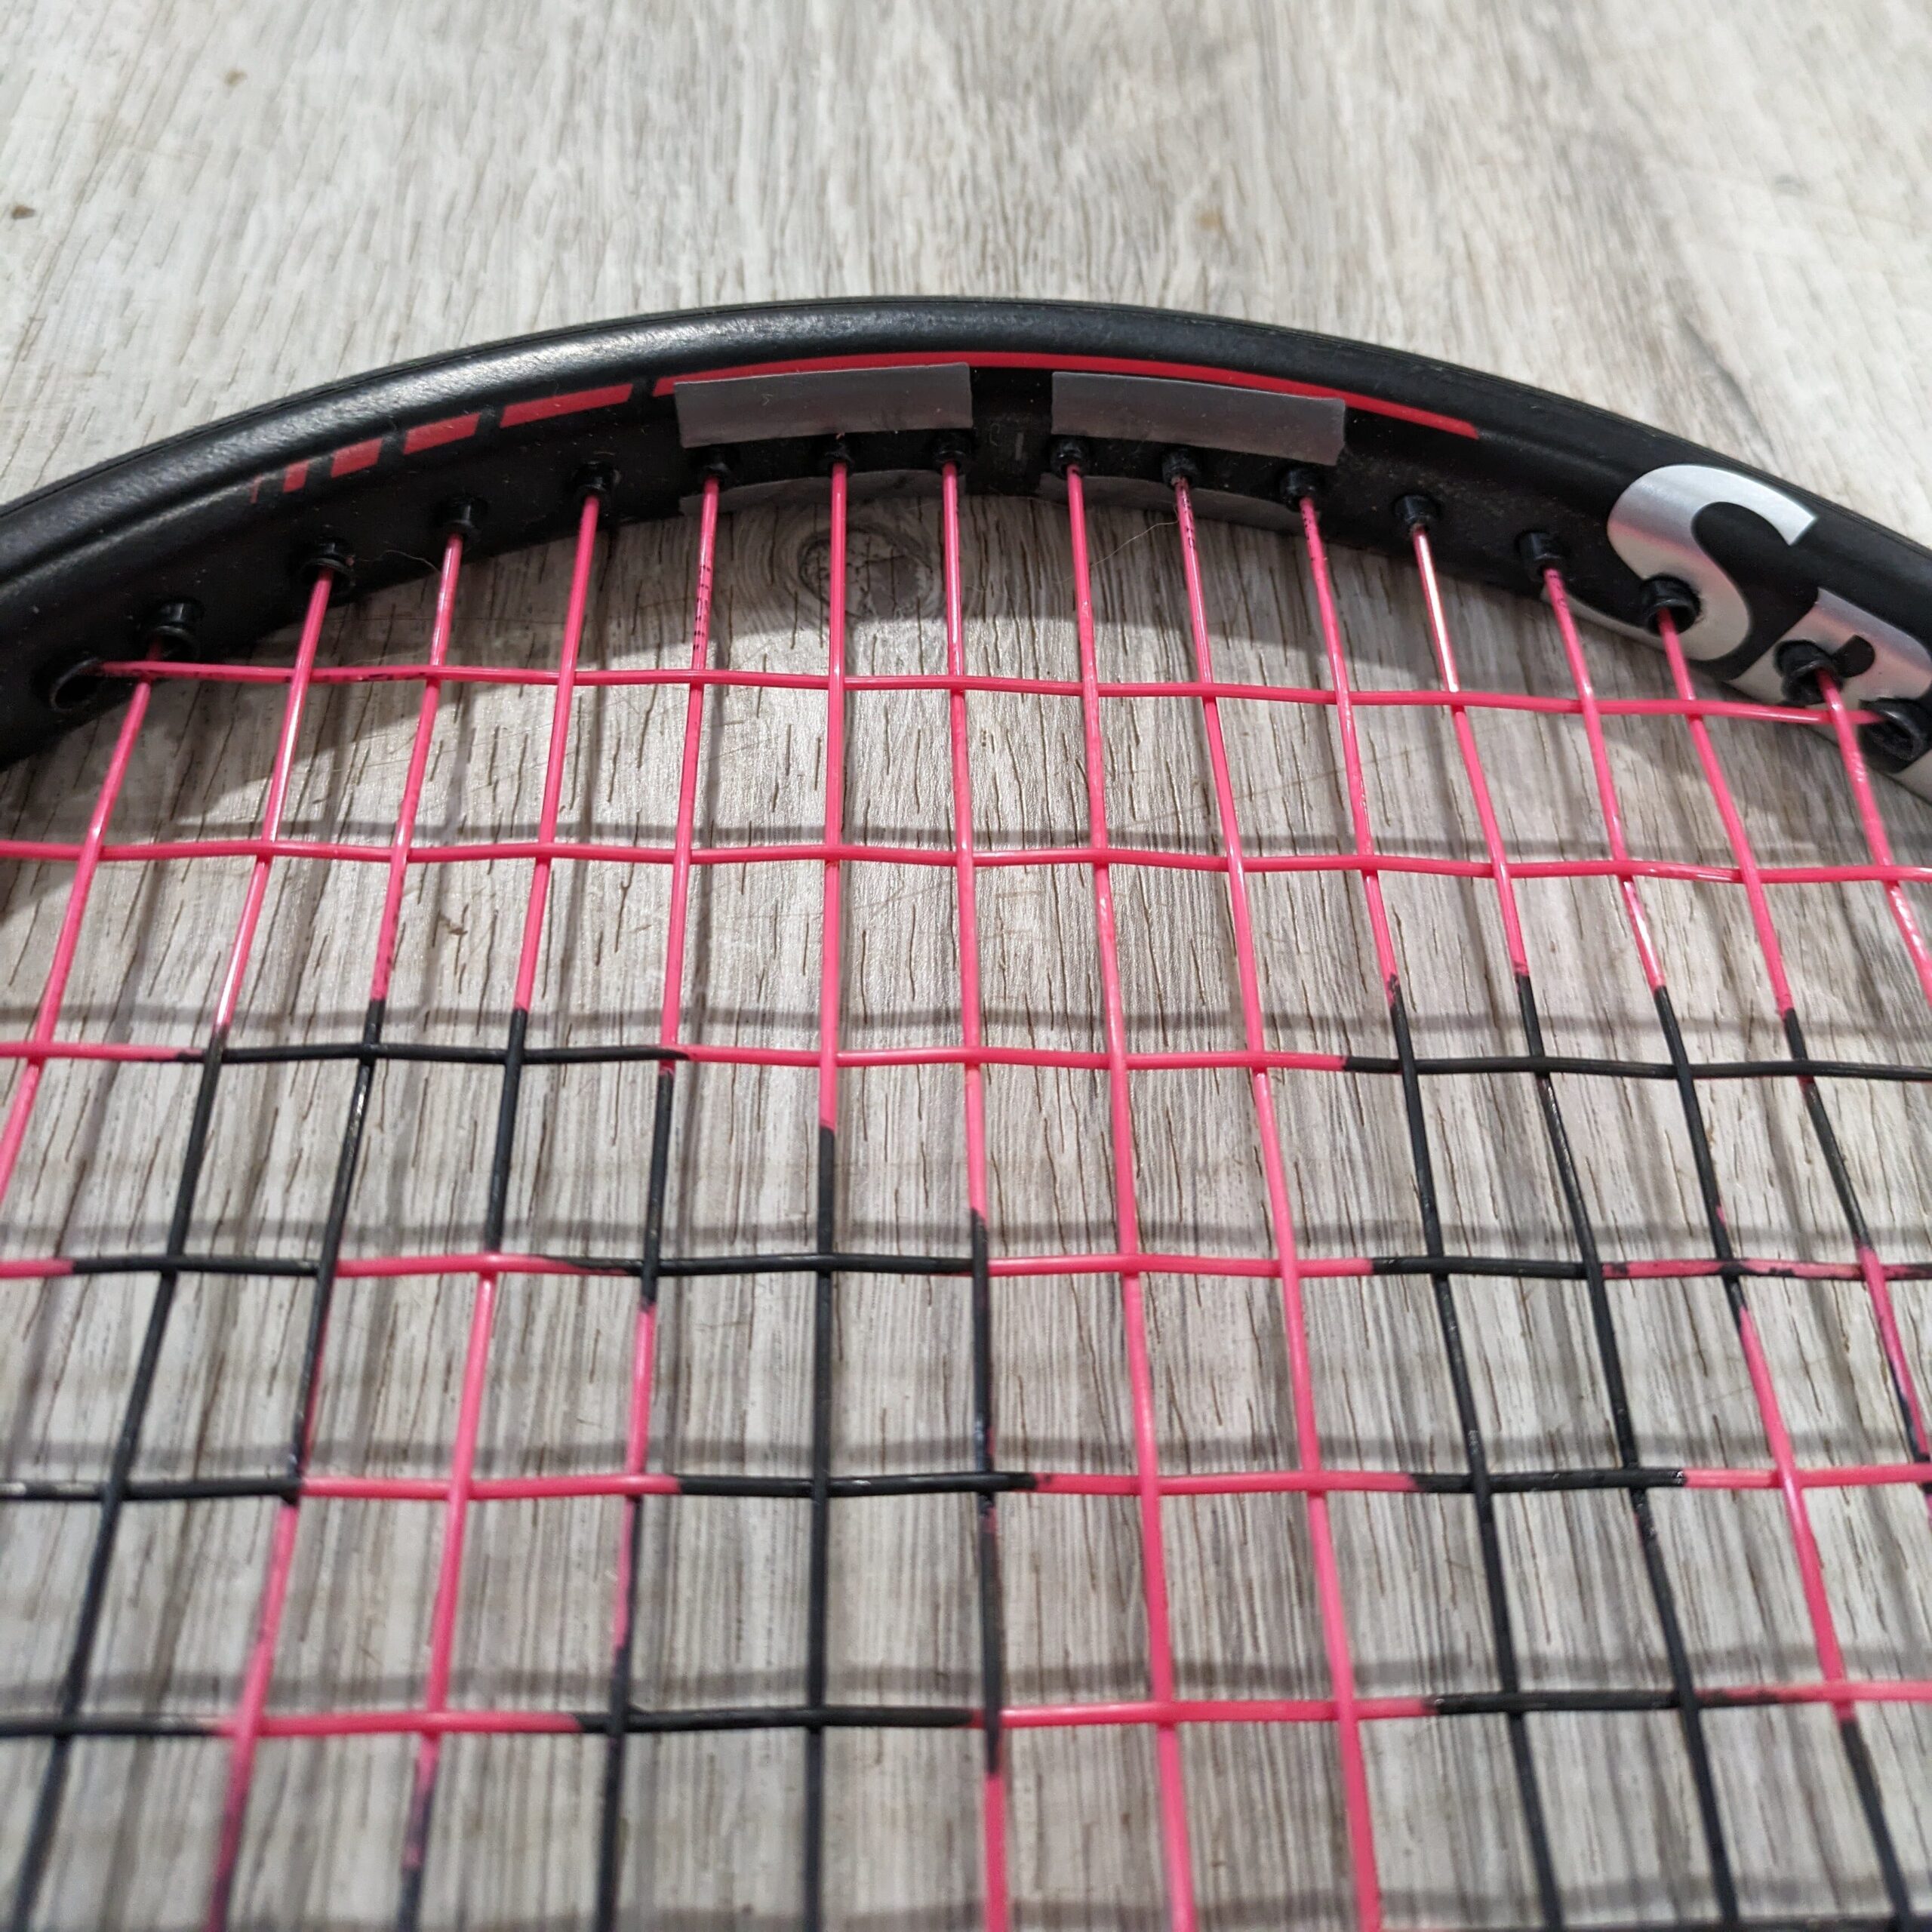 Adding Weight to Your Racquet